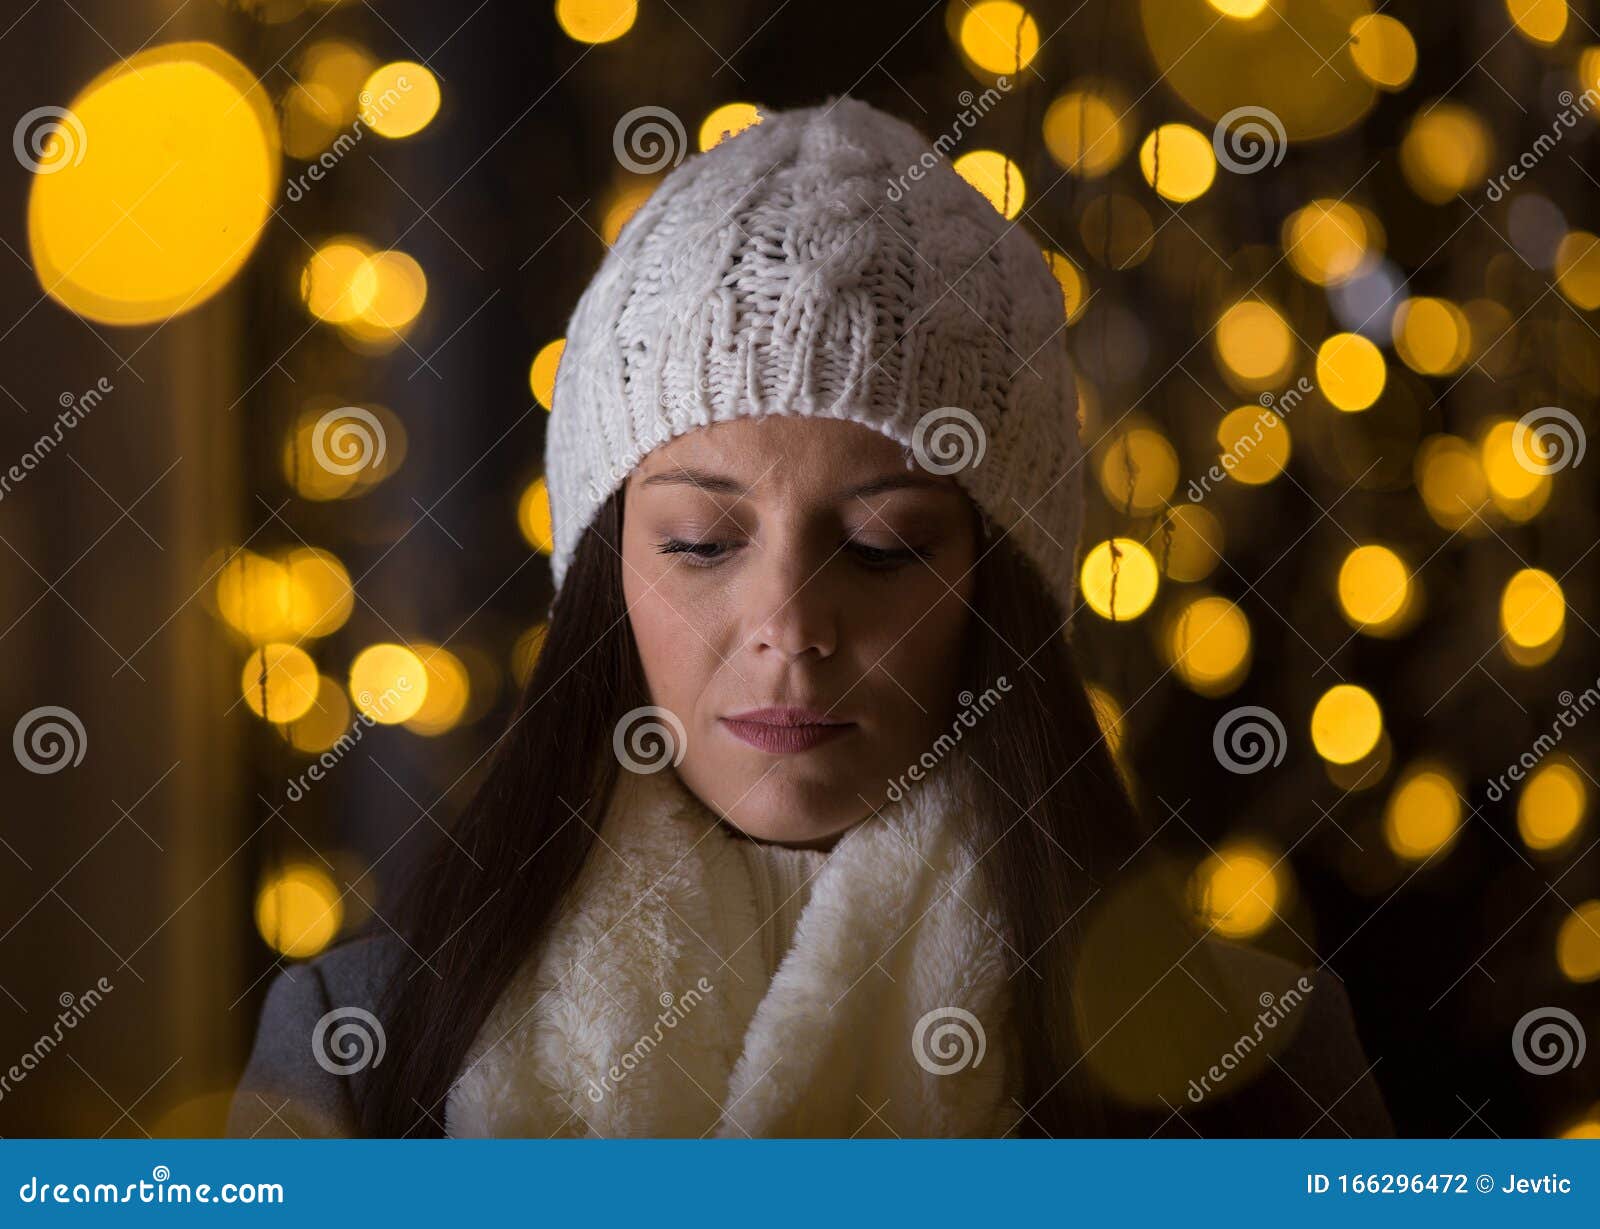 Girl in Winter Clothes on Street at Night Stock Photo - Image of ...